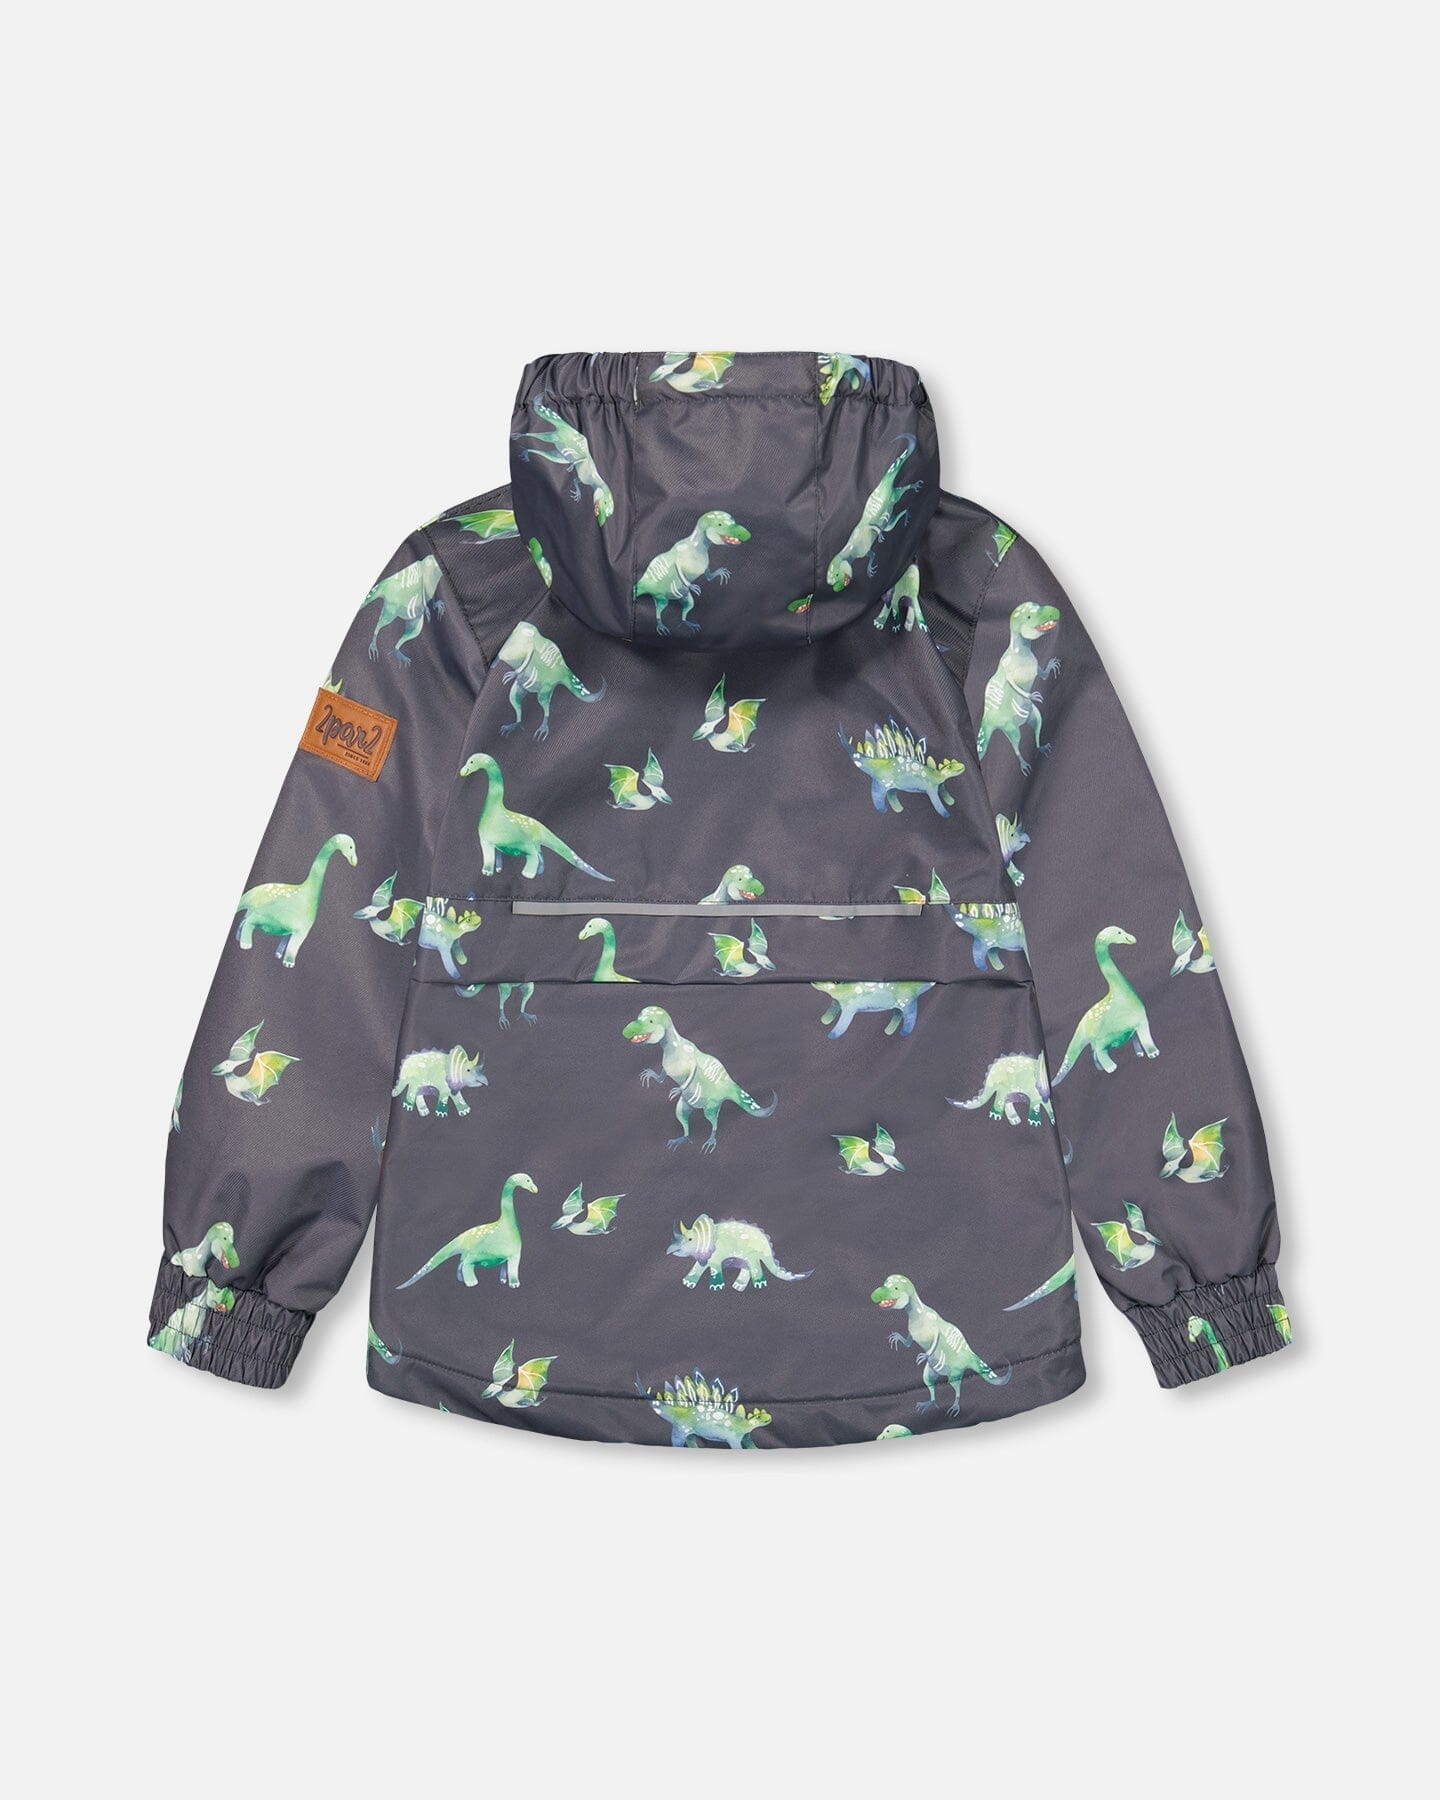 Two Piece Hooded Coat And Pant Mid-Season Set Grey Printed Dinosaurs - F30W54_018